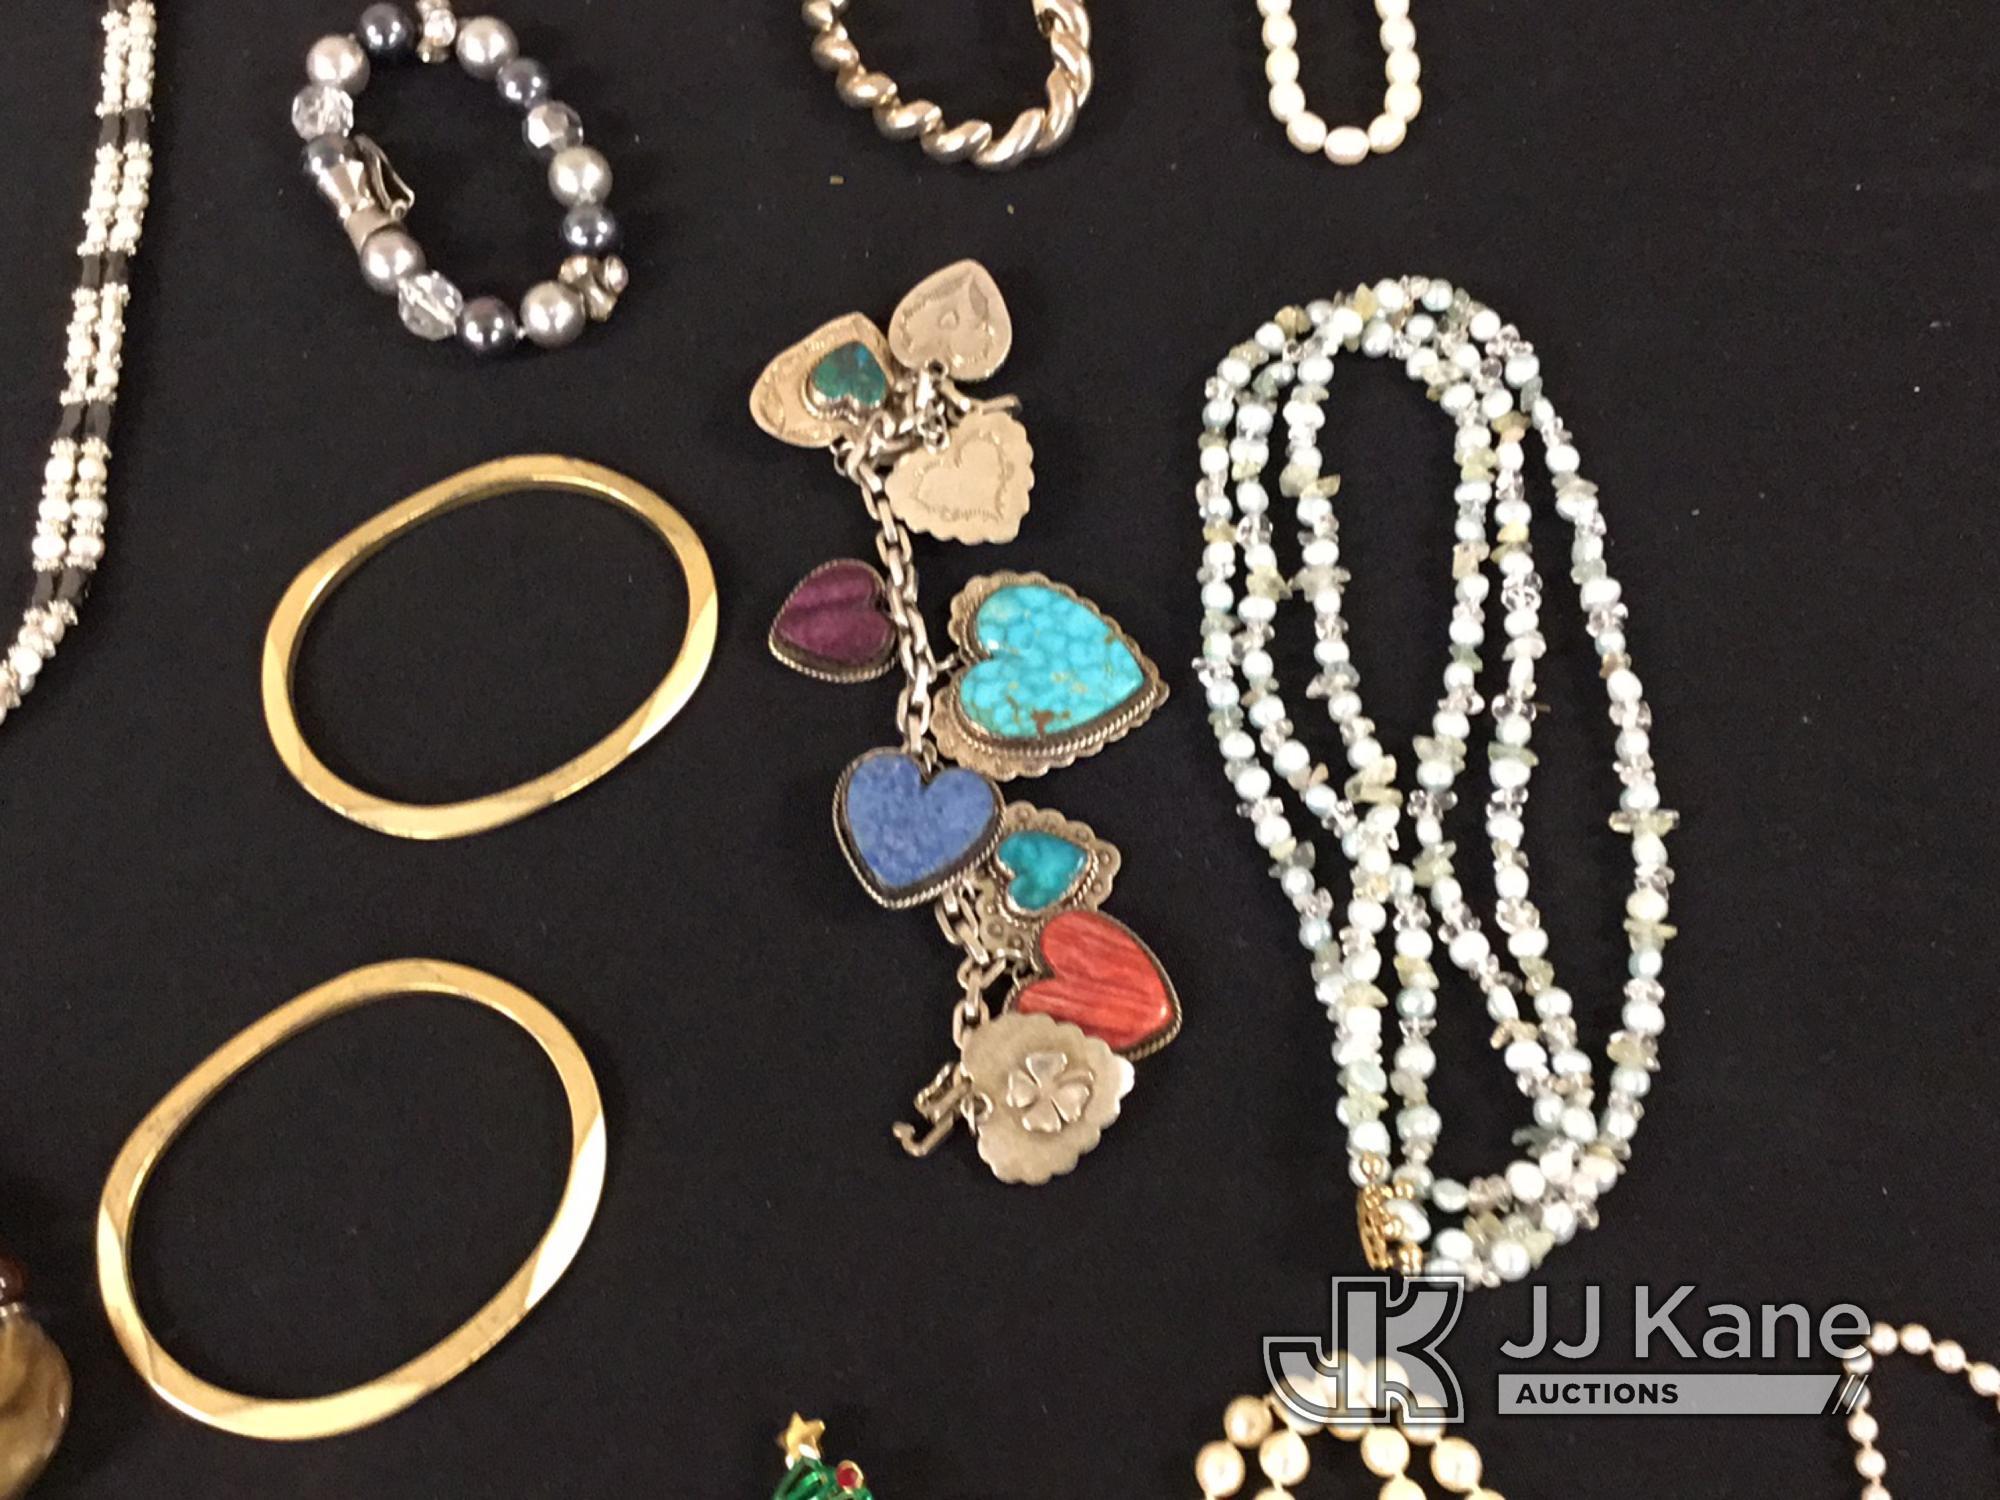 (Jurupa Valley, CA) Bracelets | necklaces | pins | possibly costume jewelry | authenticity unknown (